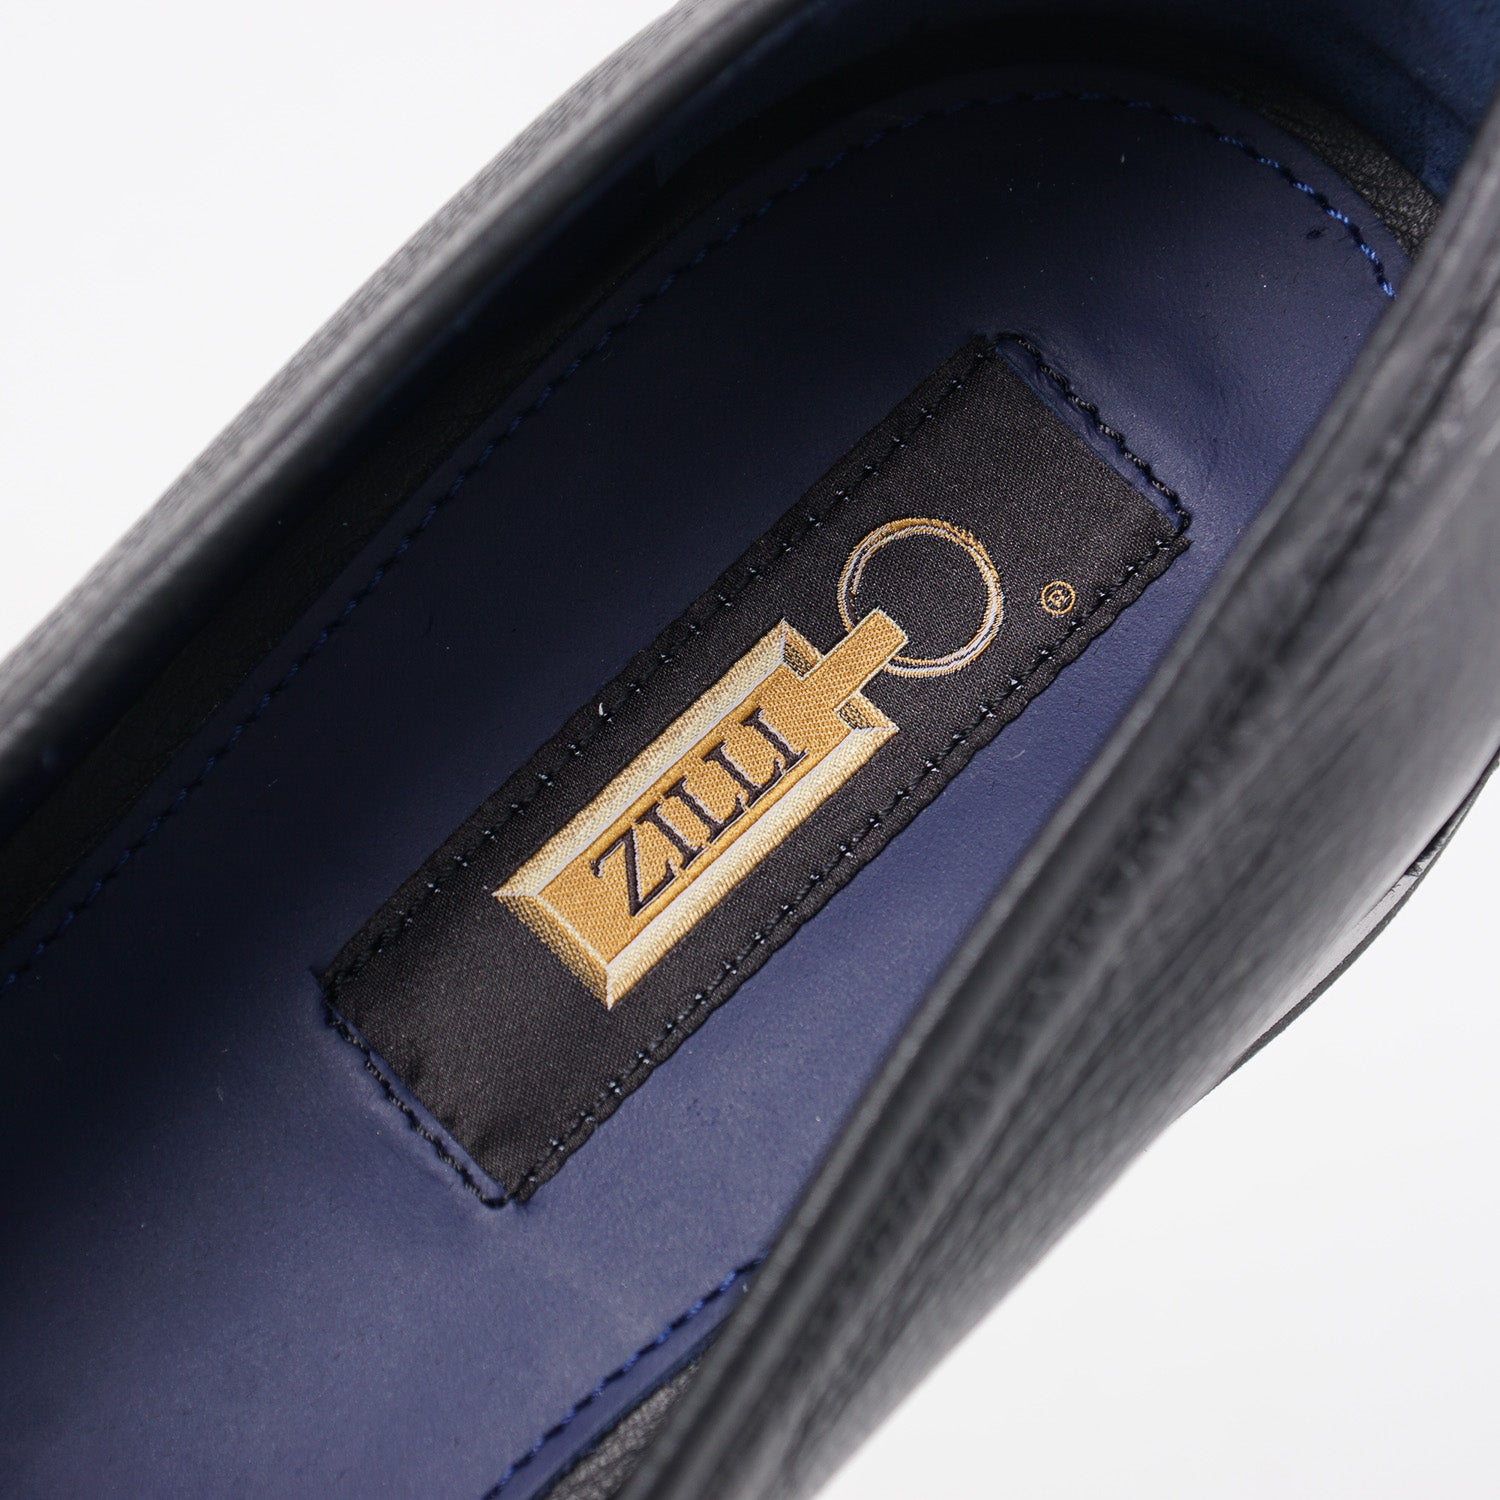 Zilli Ostrich and Calf Leather Loafers - Top Shelf Apparel